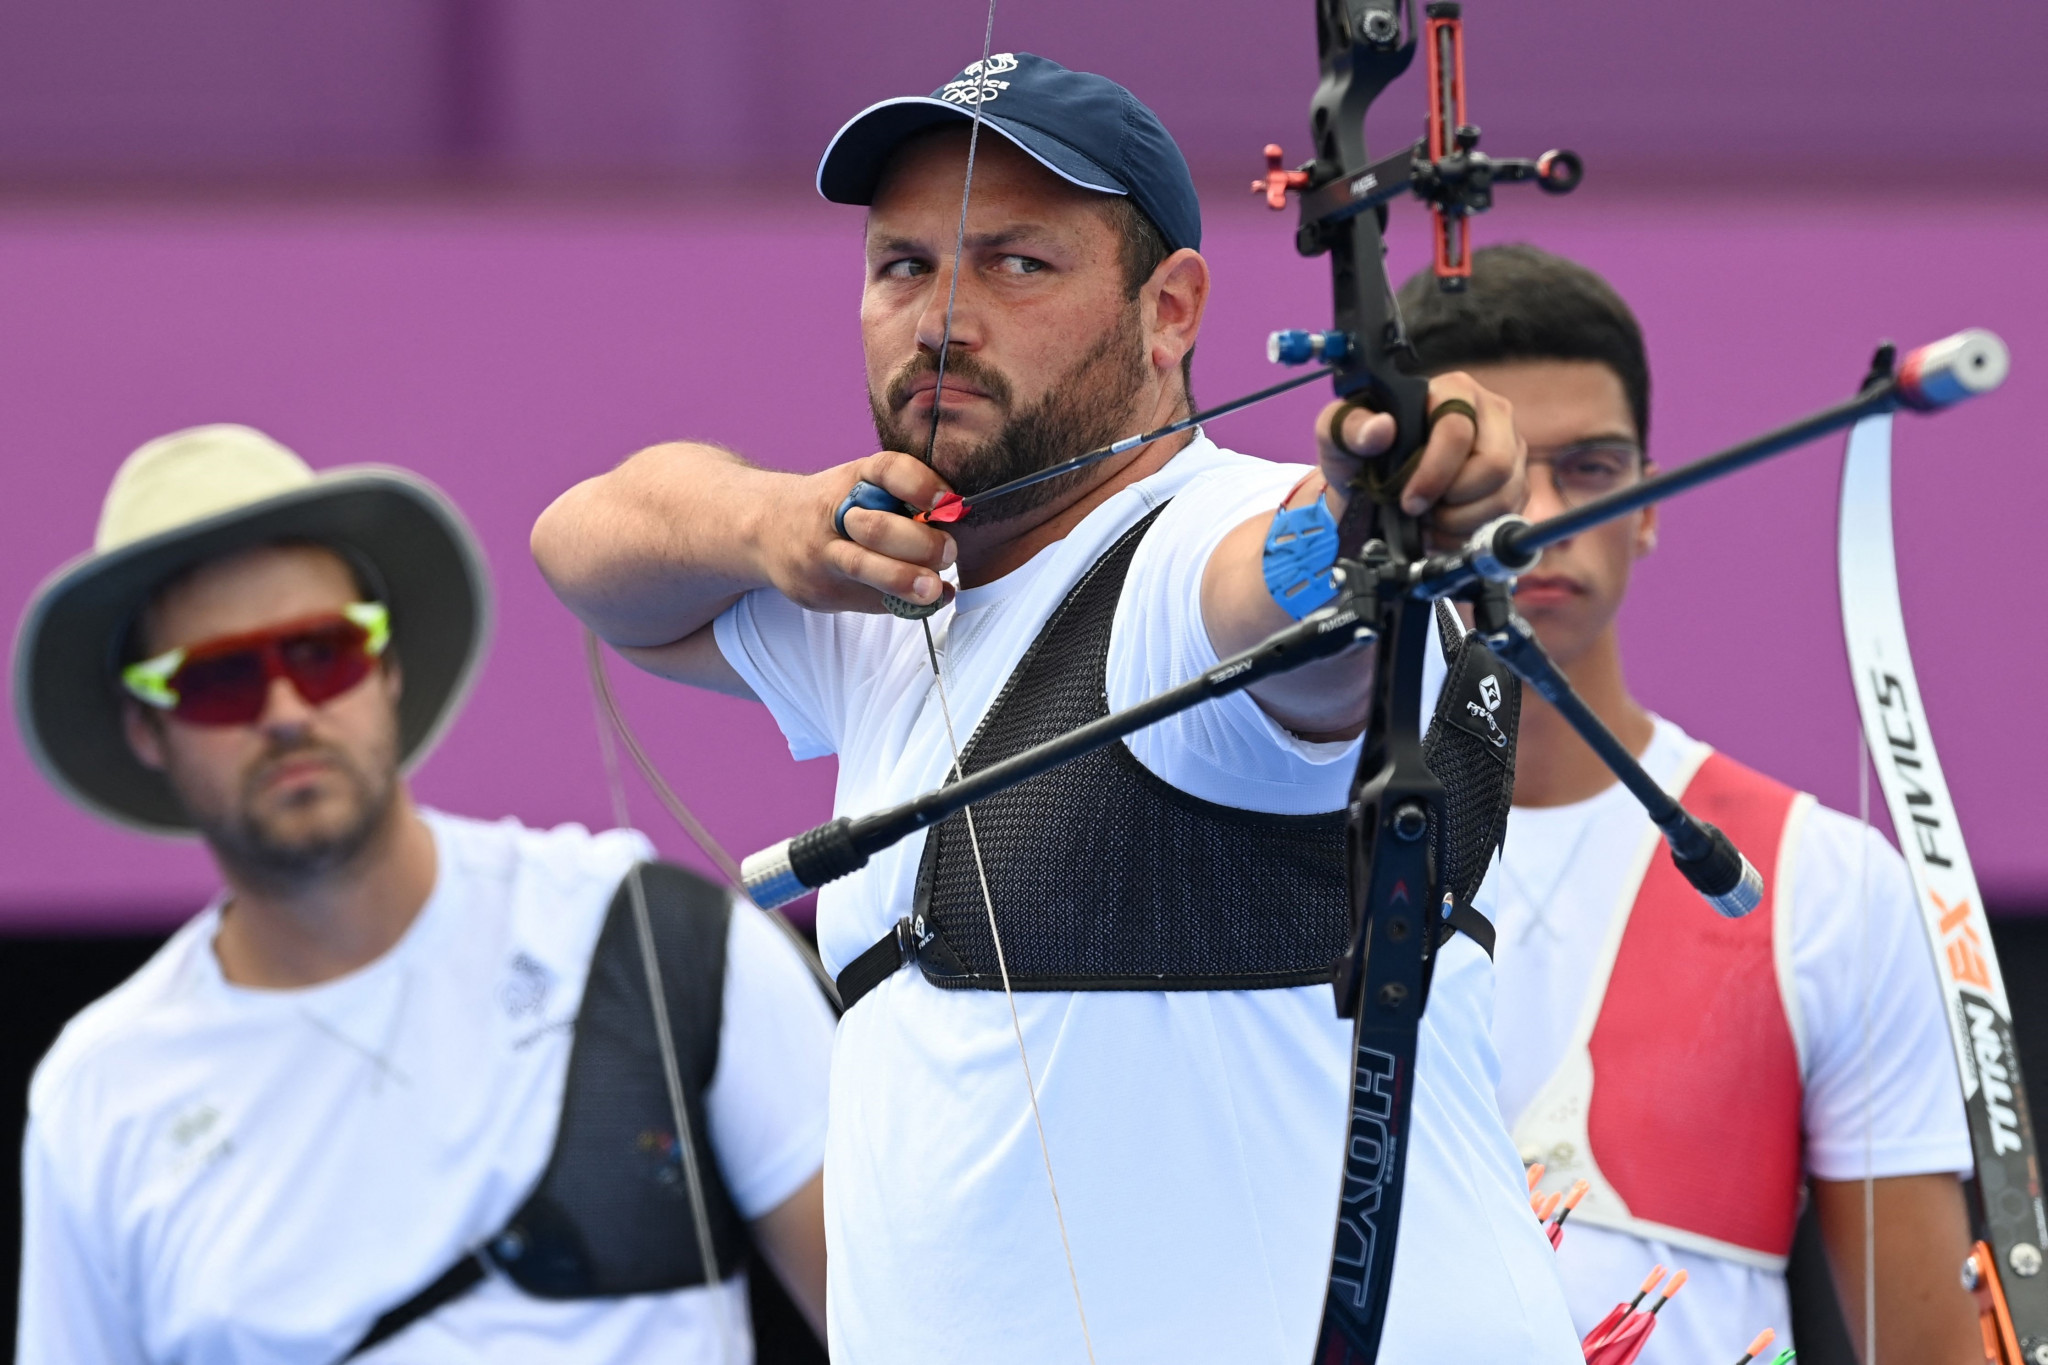 France failed to pick up an archery medal at the Tokyo 2020 Olympics ©Getty Images